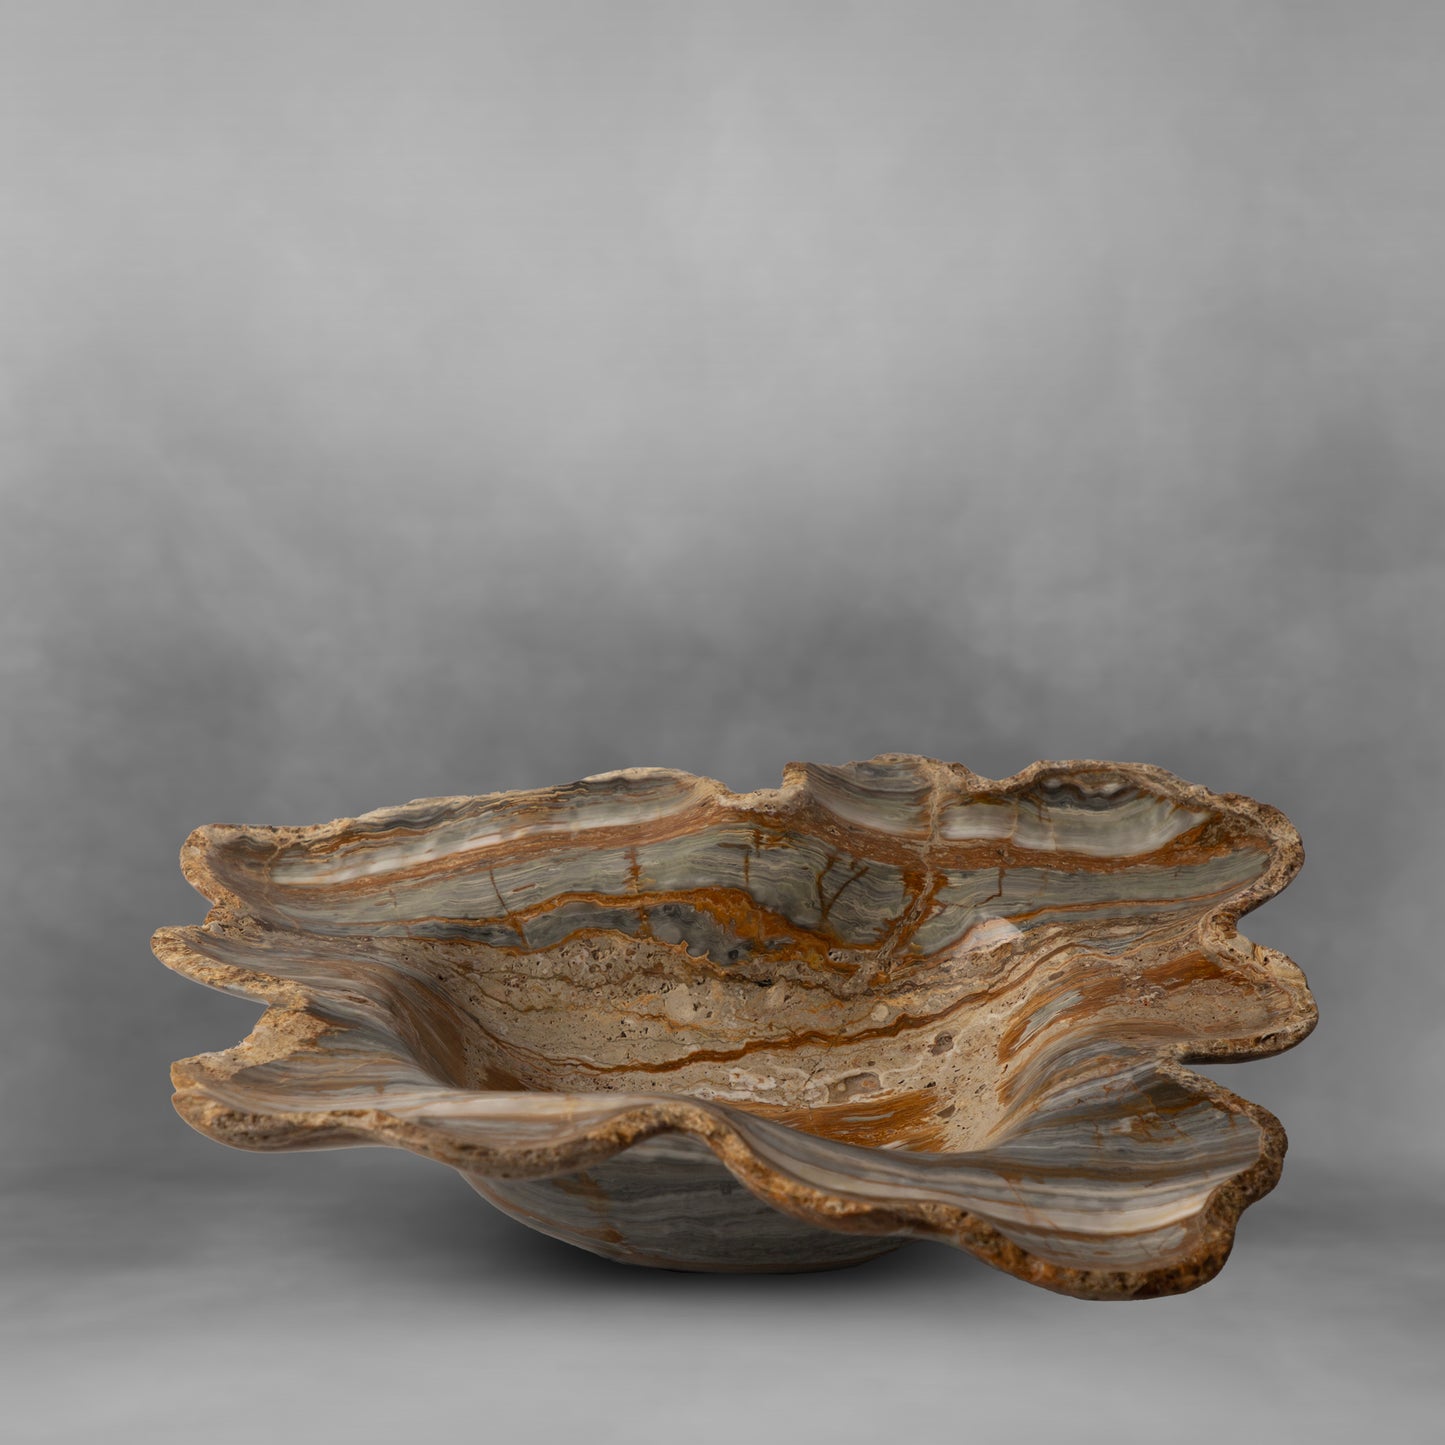 Inner Earth, brown and gray, onyx bowl